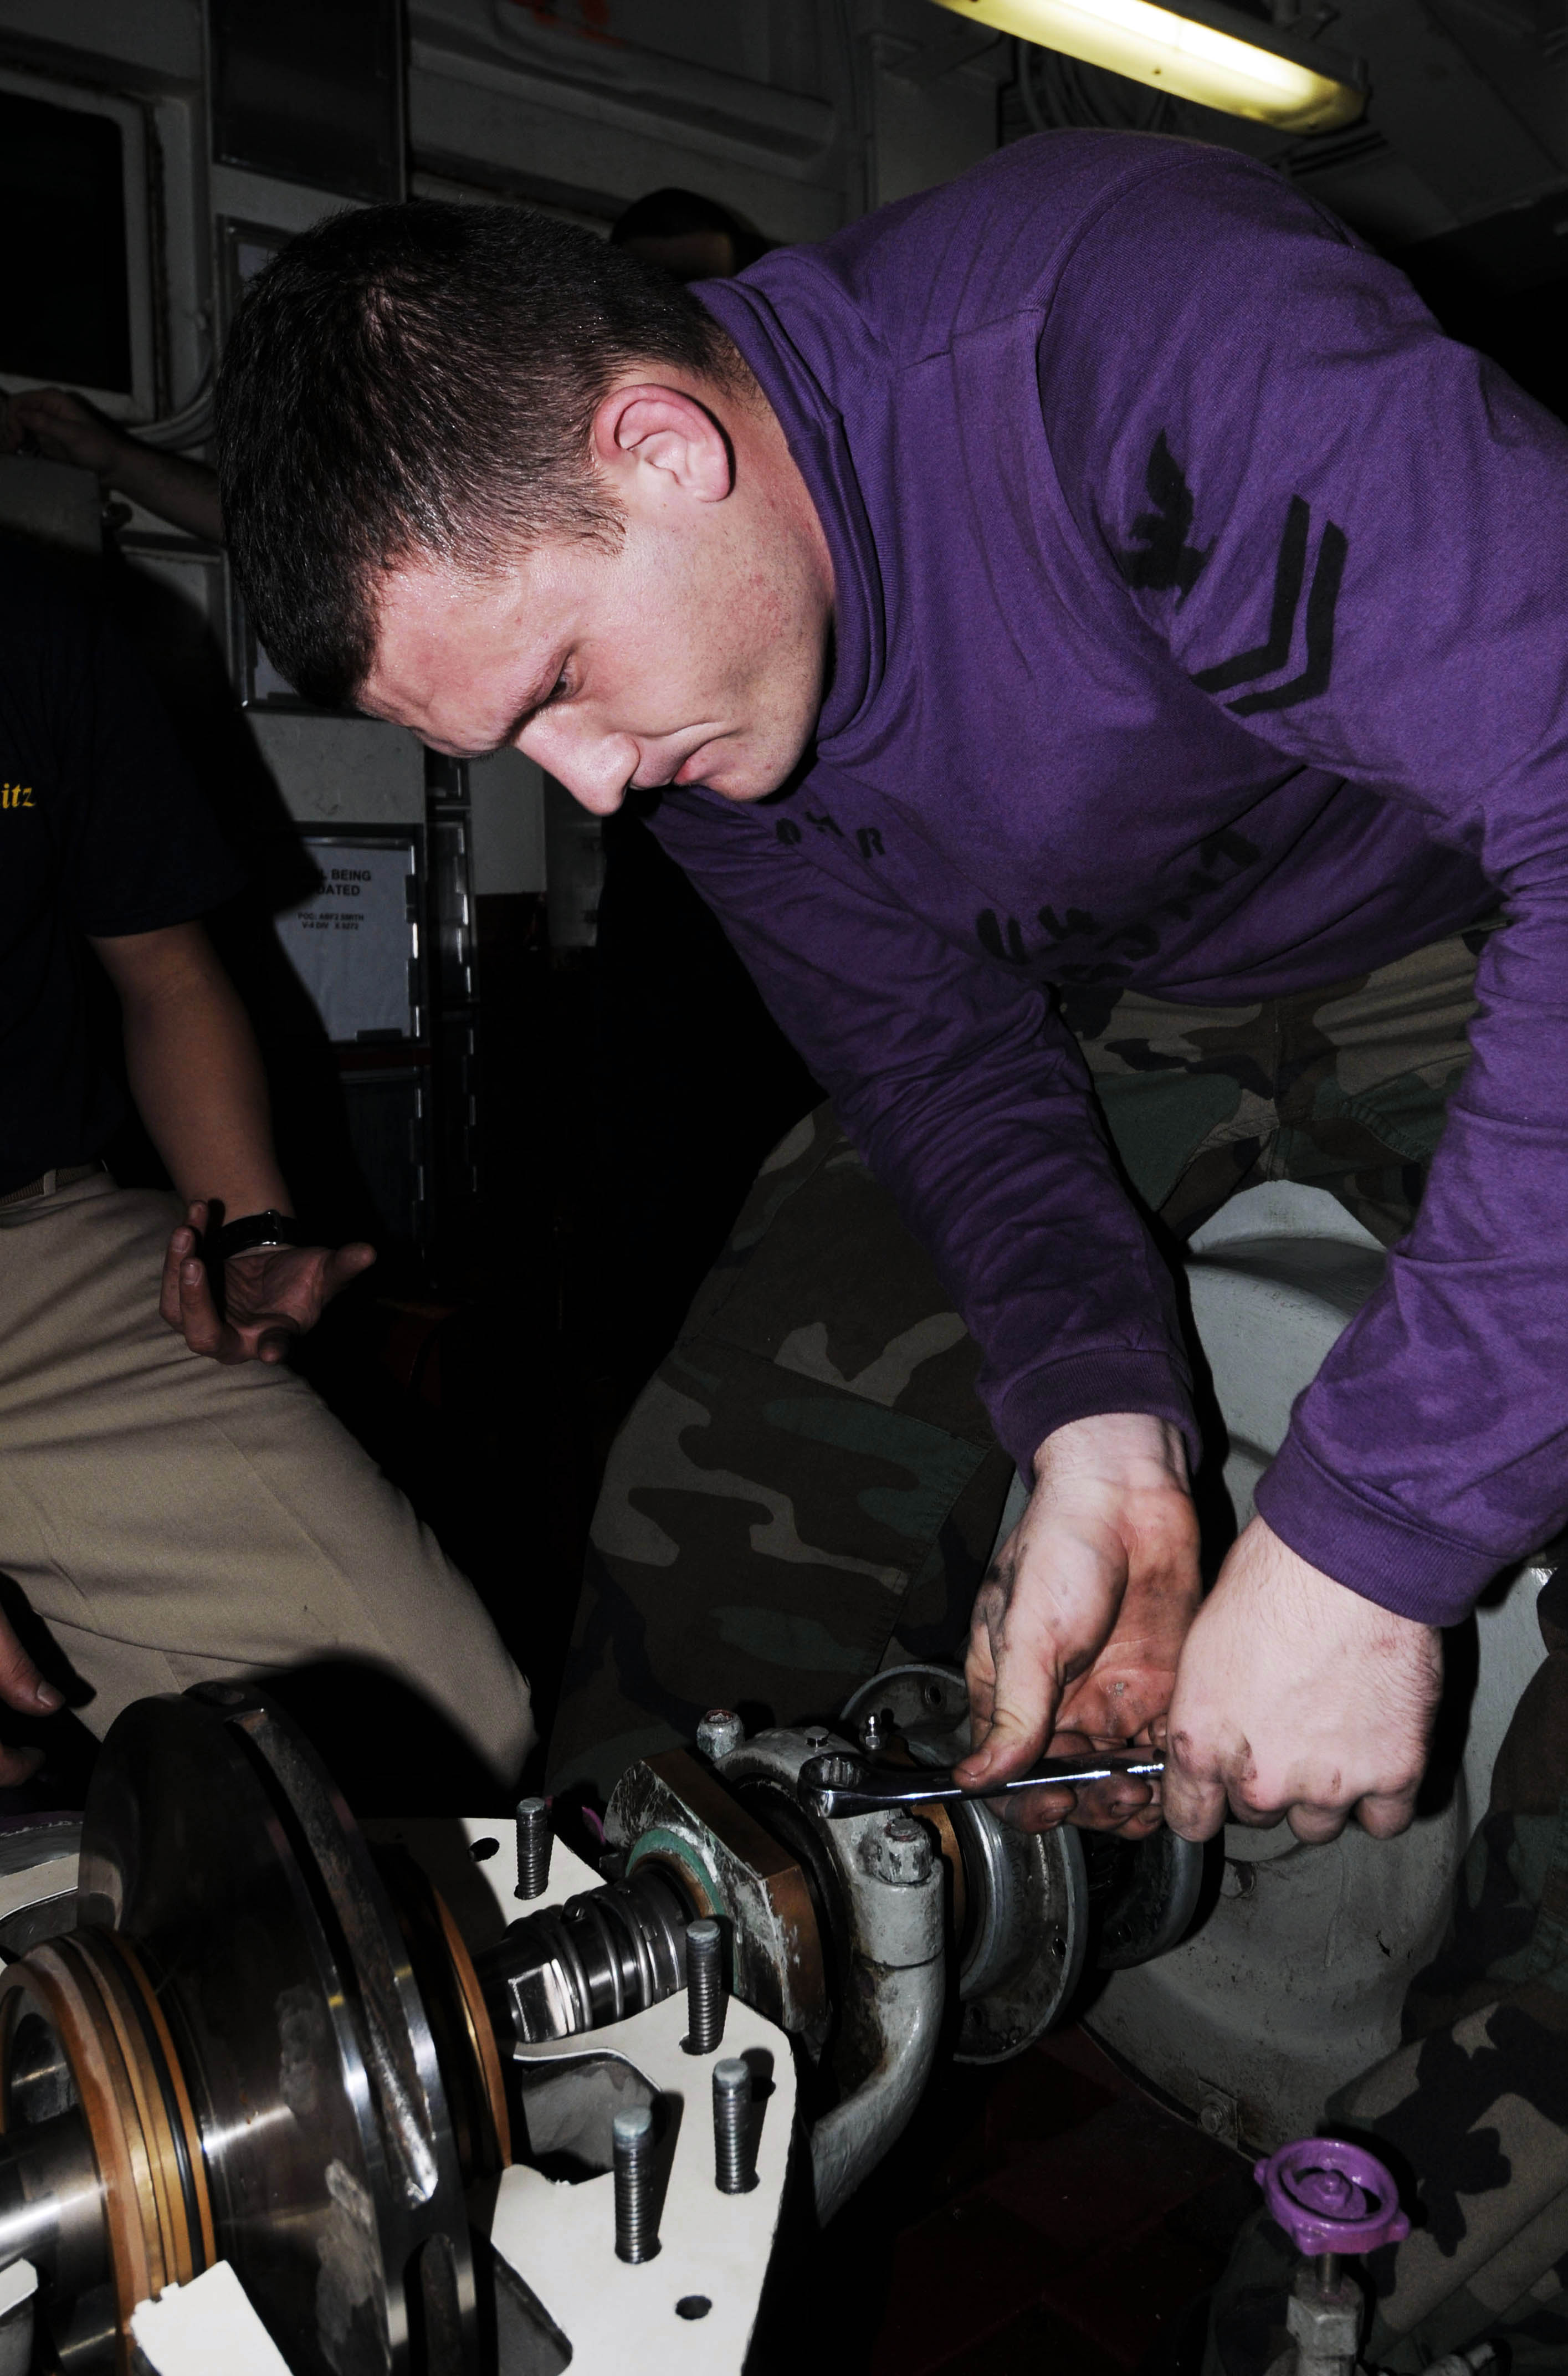 US Navy 091014-N-3038W-203 Aviation Boatswain's Mate (Fuels) 2nd Class Michael Foster performs maintenance on a fuel pump in the number ^2 pump room aboard the aircraft carrier USS Nimitz (CVN 68)